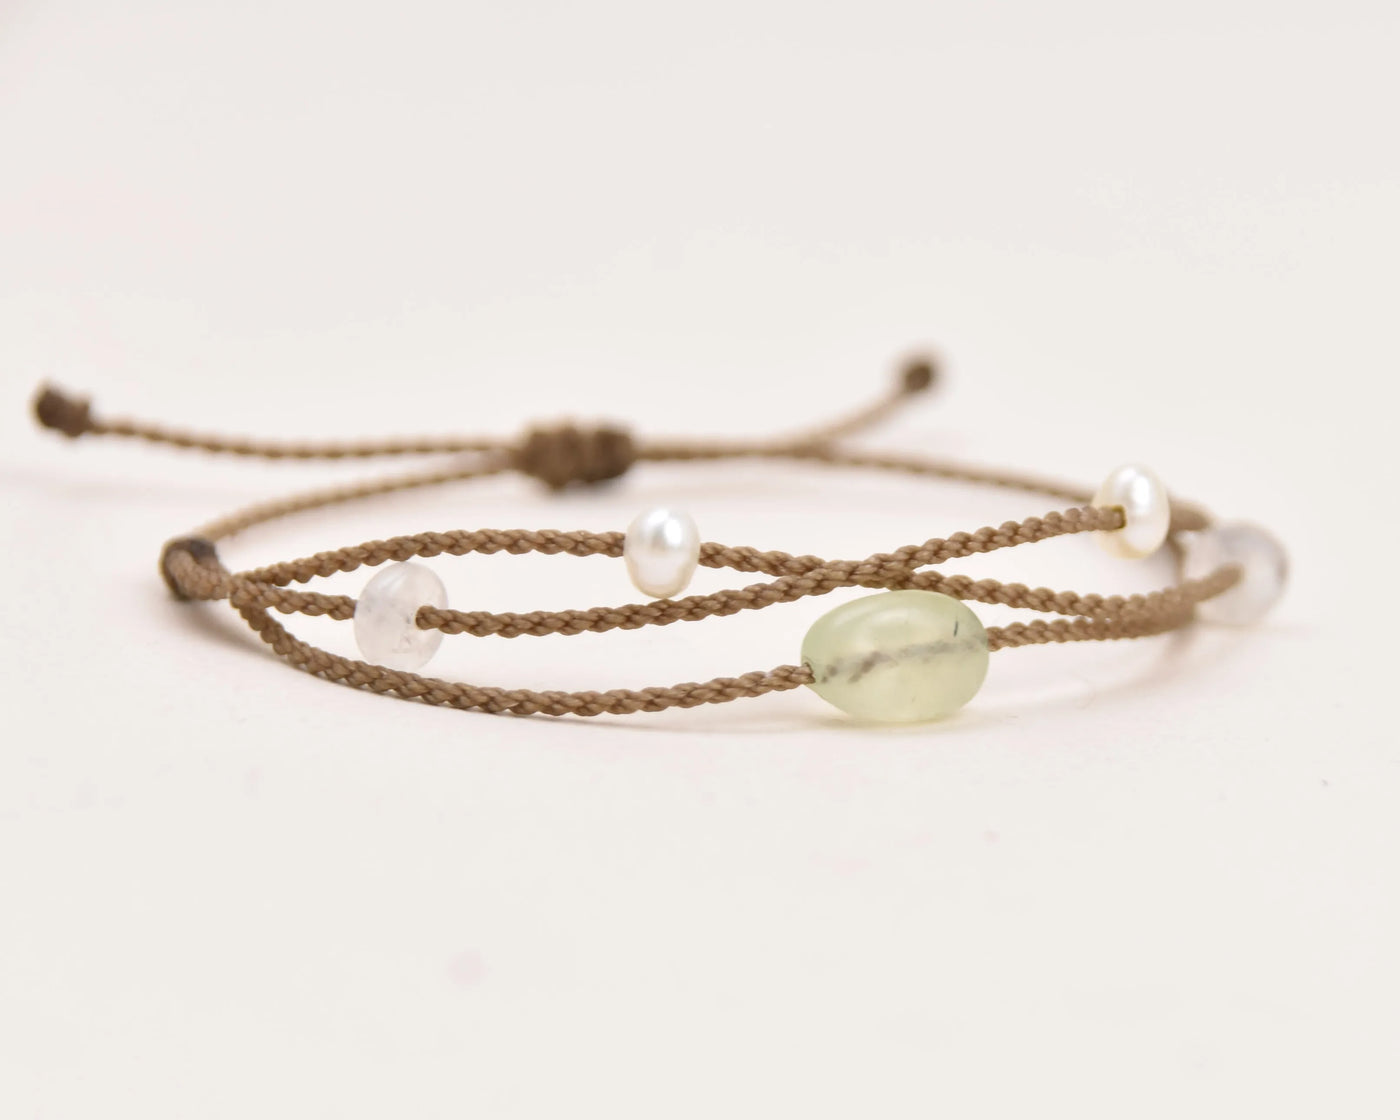 Mental Health Matters Riptide Bracelet single photo on white backgorund extreme closeup of prehnite center stone, freshwater pearls, and moonstone rondelles